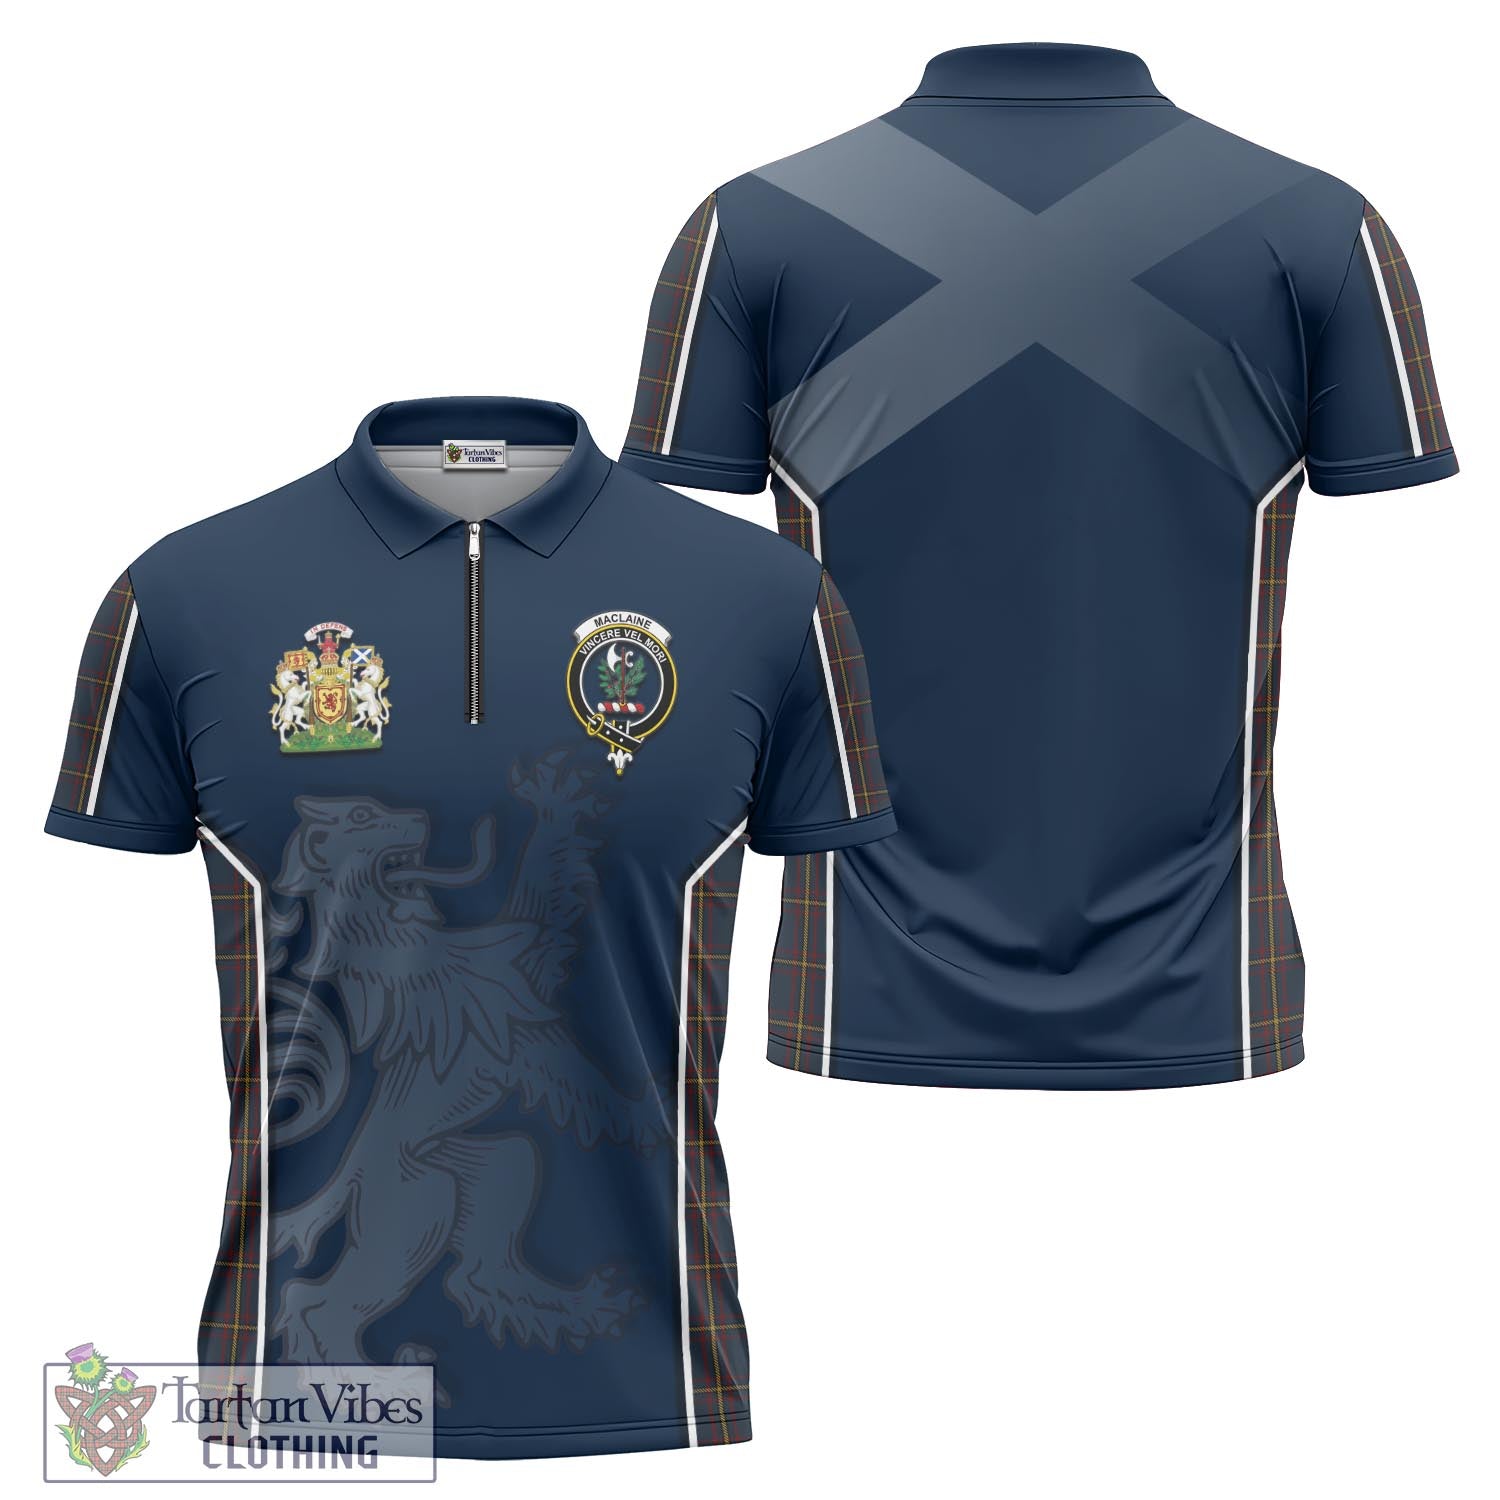 Tartan Vibes Clothing MacLaine of Lochbuie Hunting Tartan Zipper Polo Shirt with Family Crest and Lion Rampant Vibes Sport Style